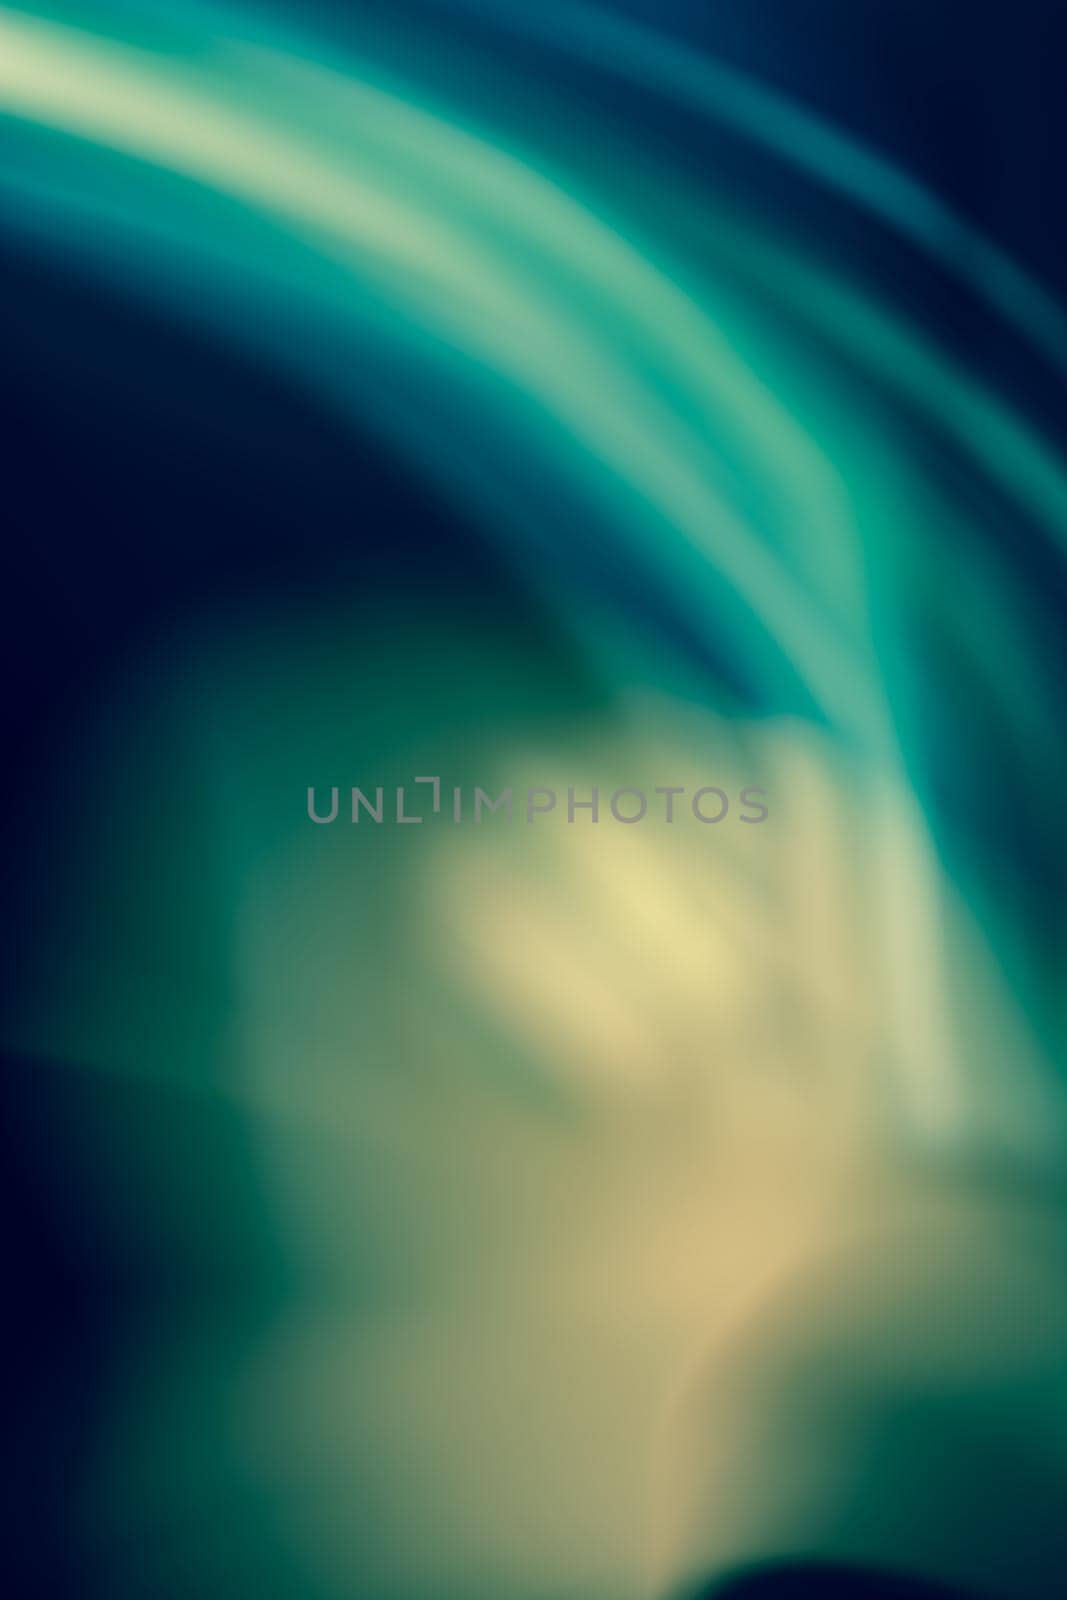 Abstract northern lights. Vertical background in blue turquoise shades. Backdrop